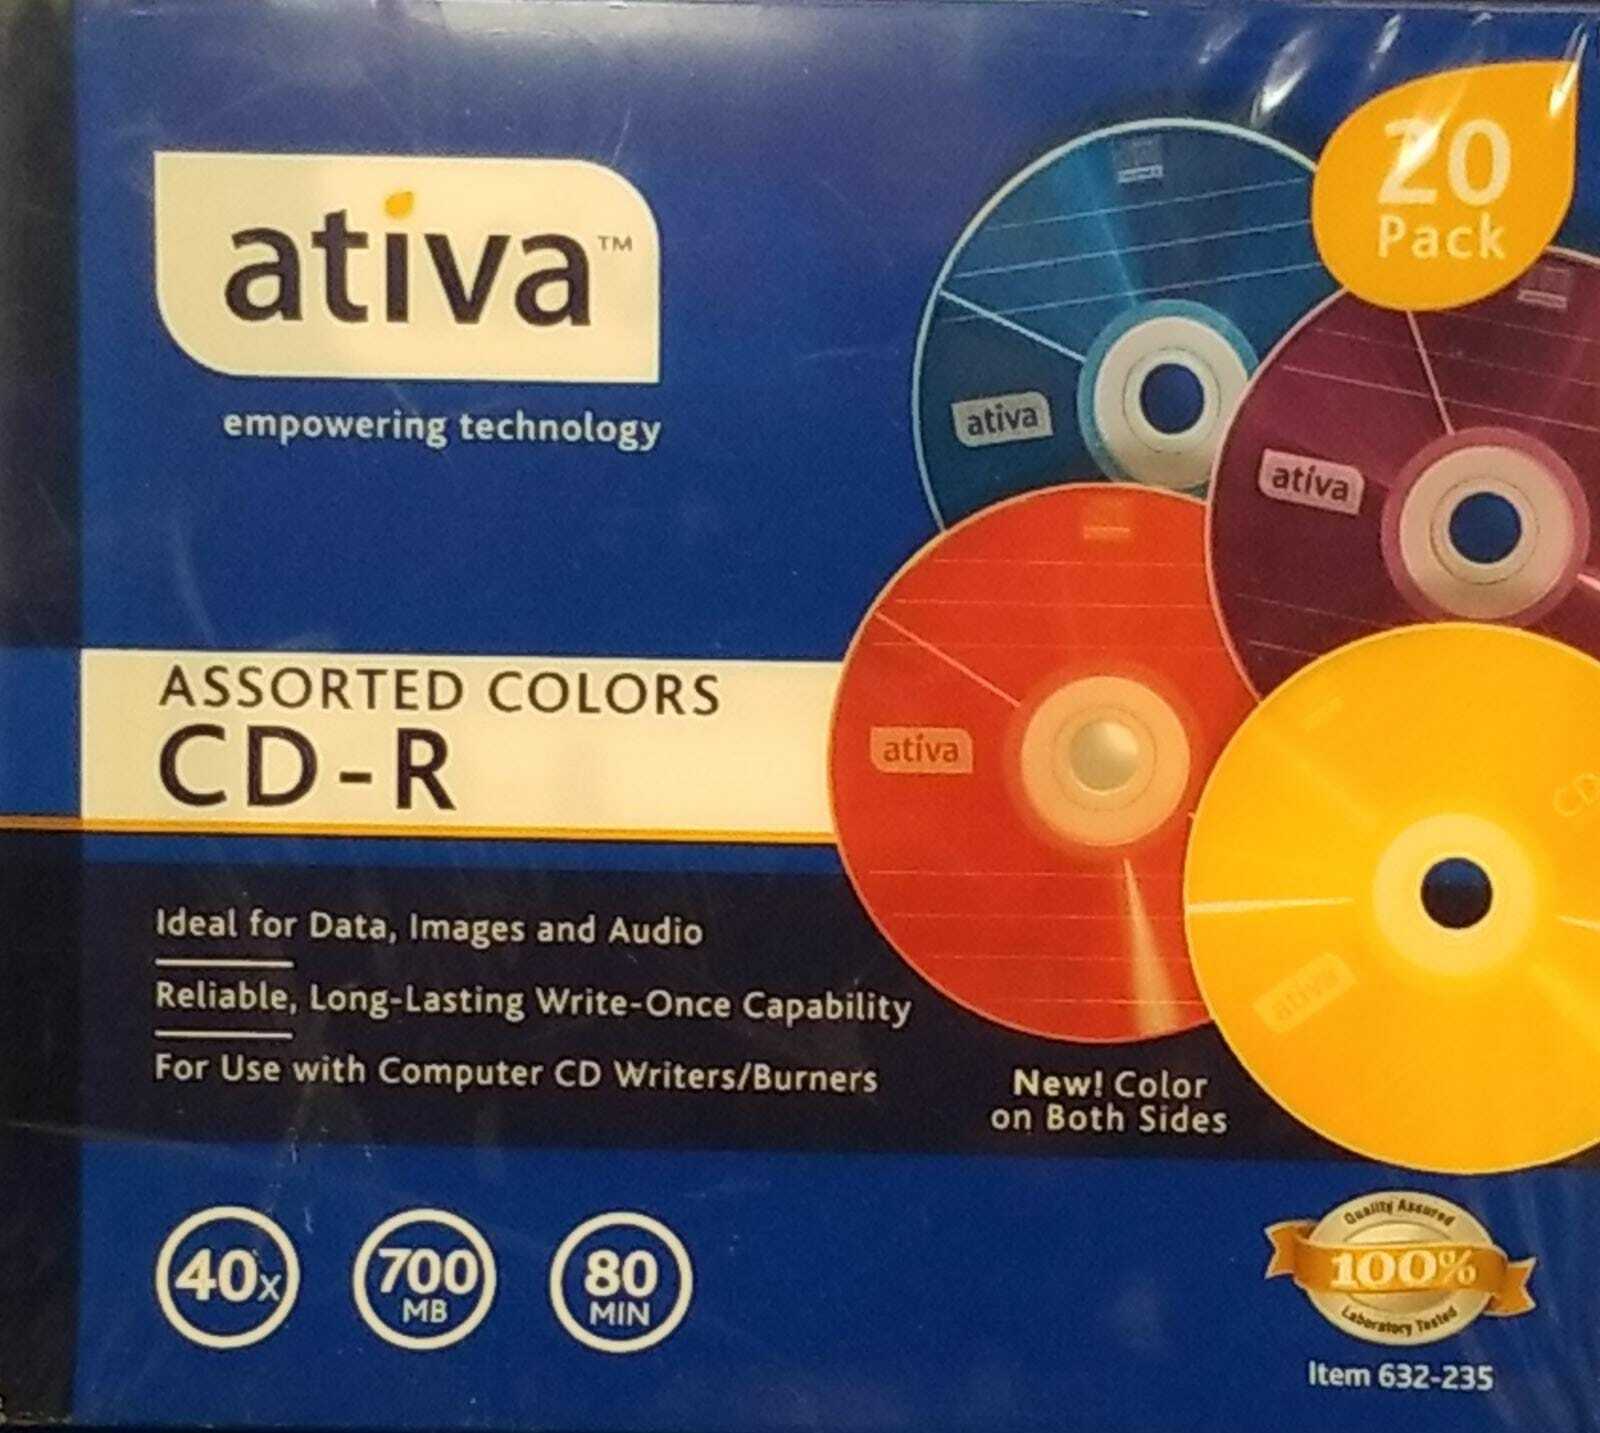 Ativa® CD-R Recordable Media With Slim Jewel Cases, 700MB/80 Minutes, 20 Pack